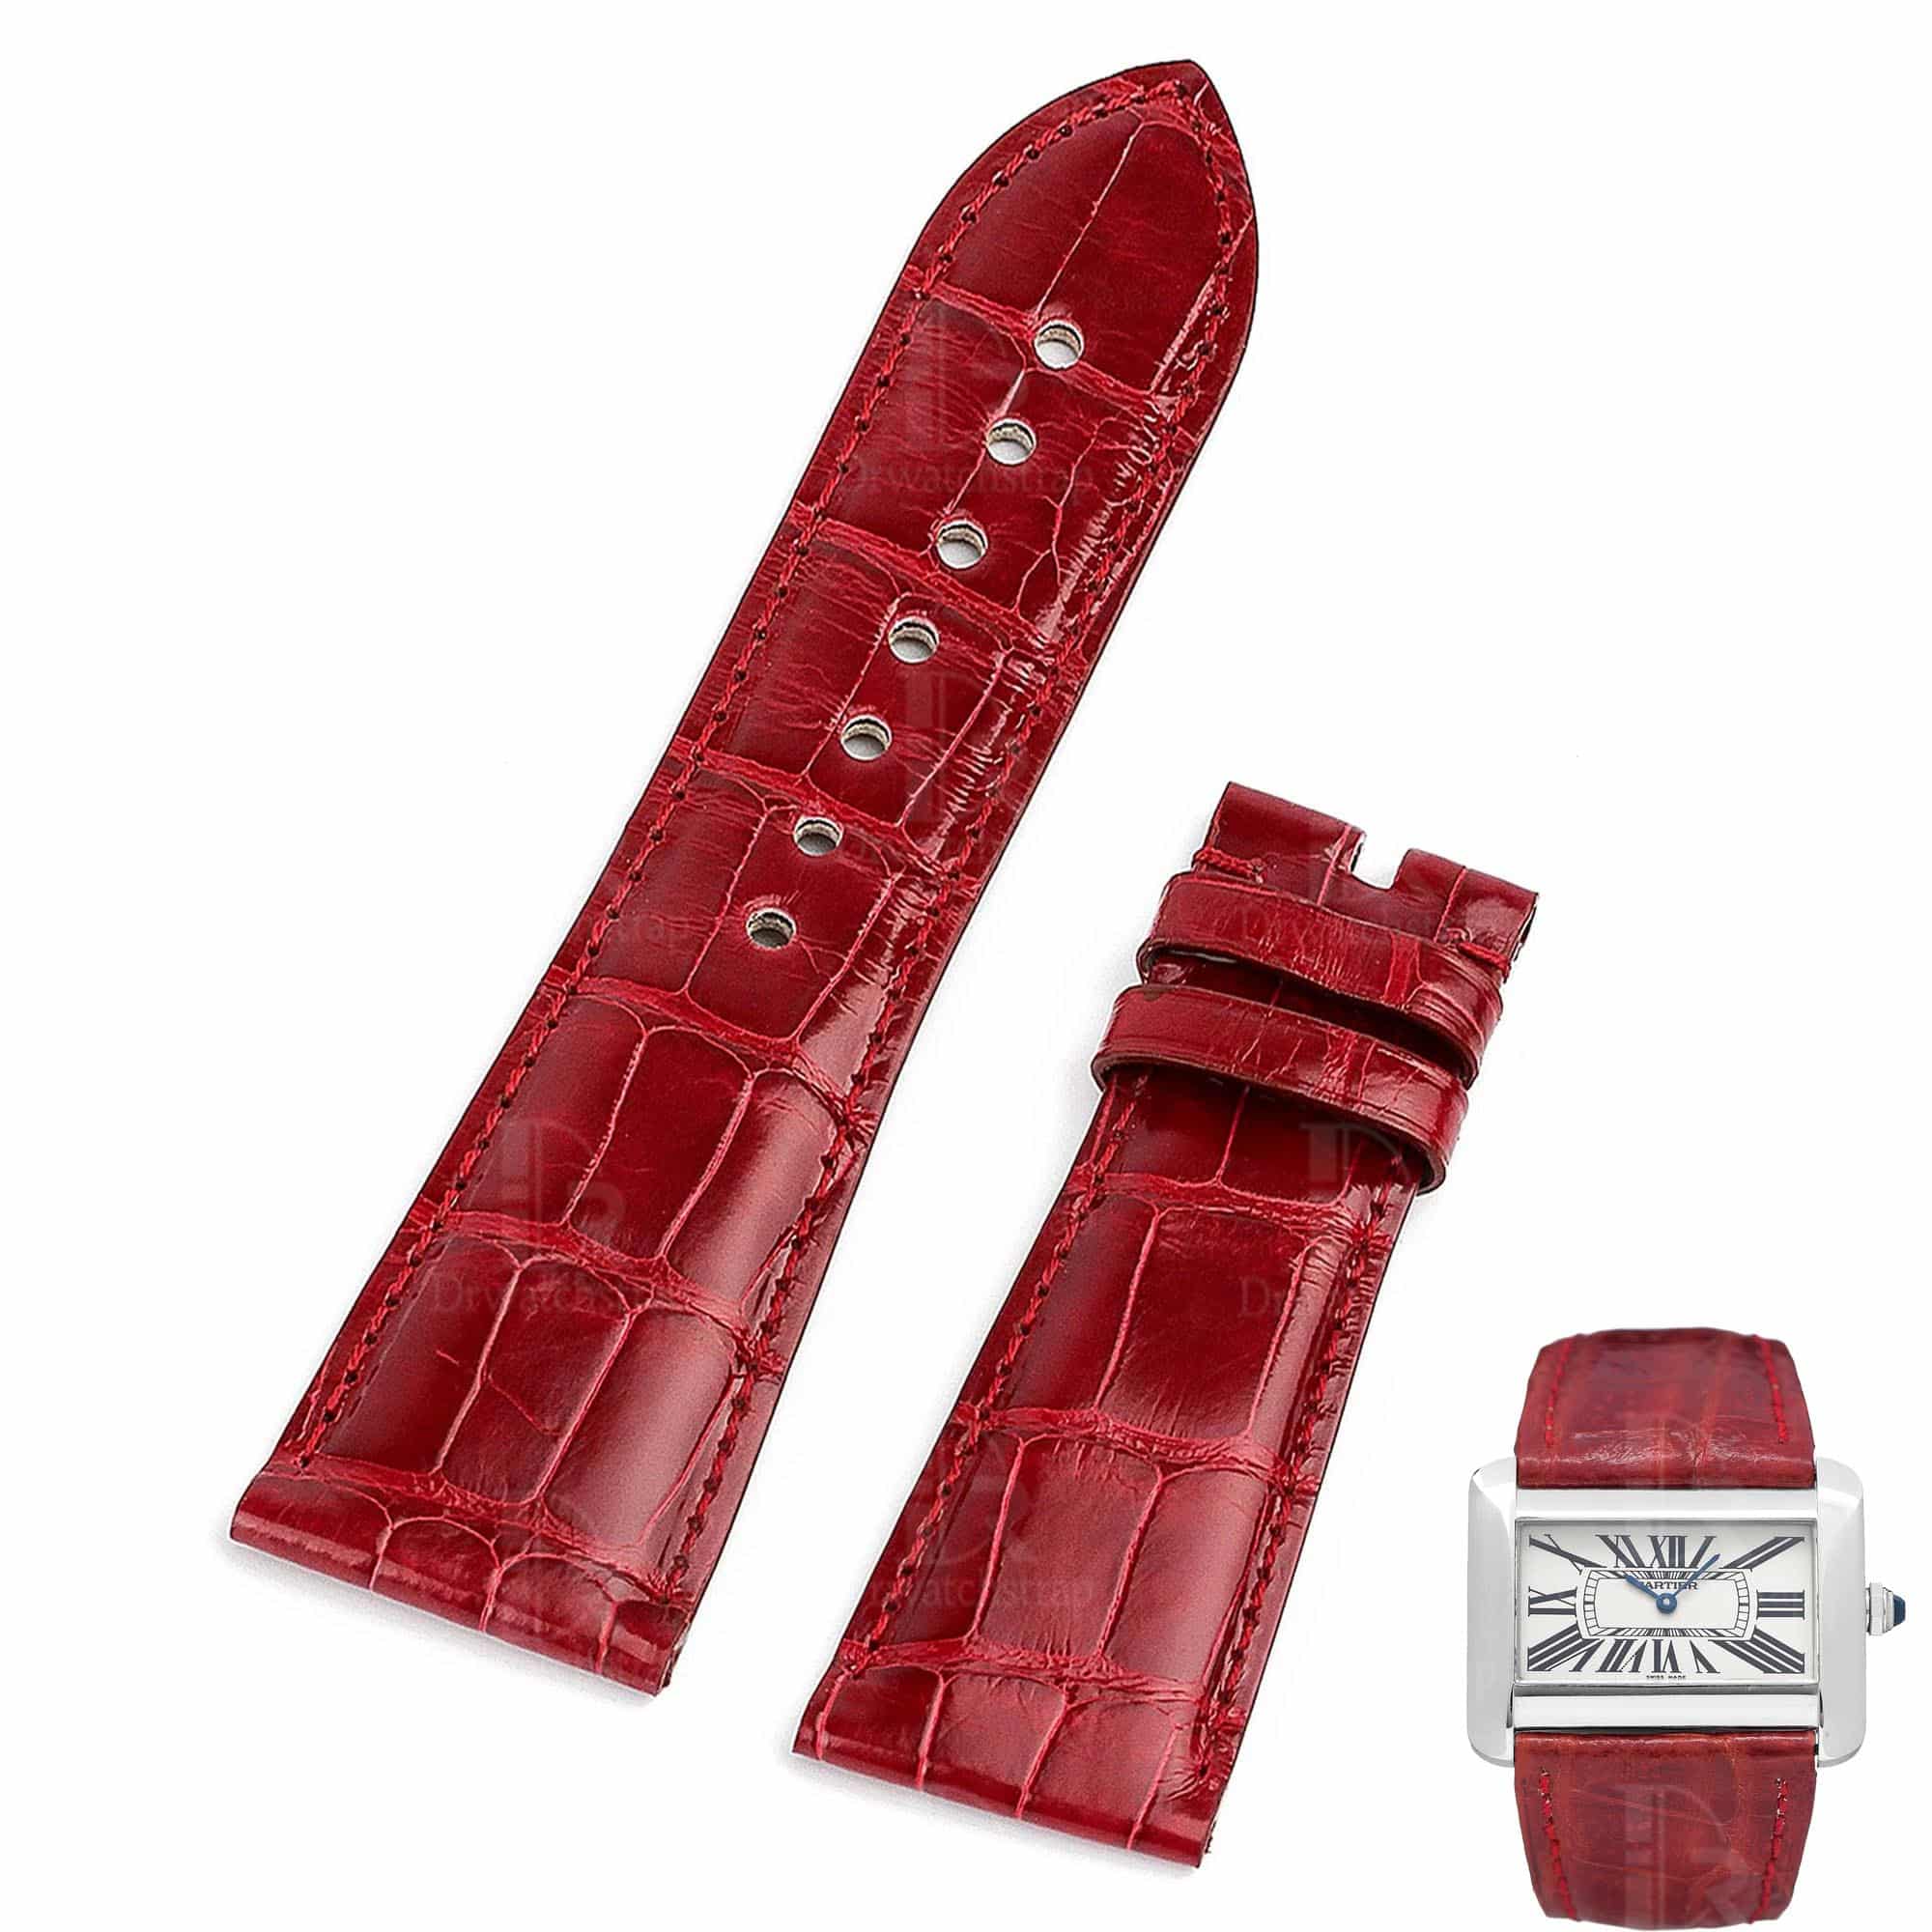 Genuine high-end quality custom OEM red Alligator leather watch strap & watchband replacement for Cartier Tank Divan men's and ladies' luxury watches - 100% handmade custom best quality Grade A Crocodile Cartier straps and watch bands from DR Watchstrap at low price